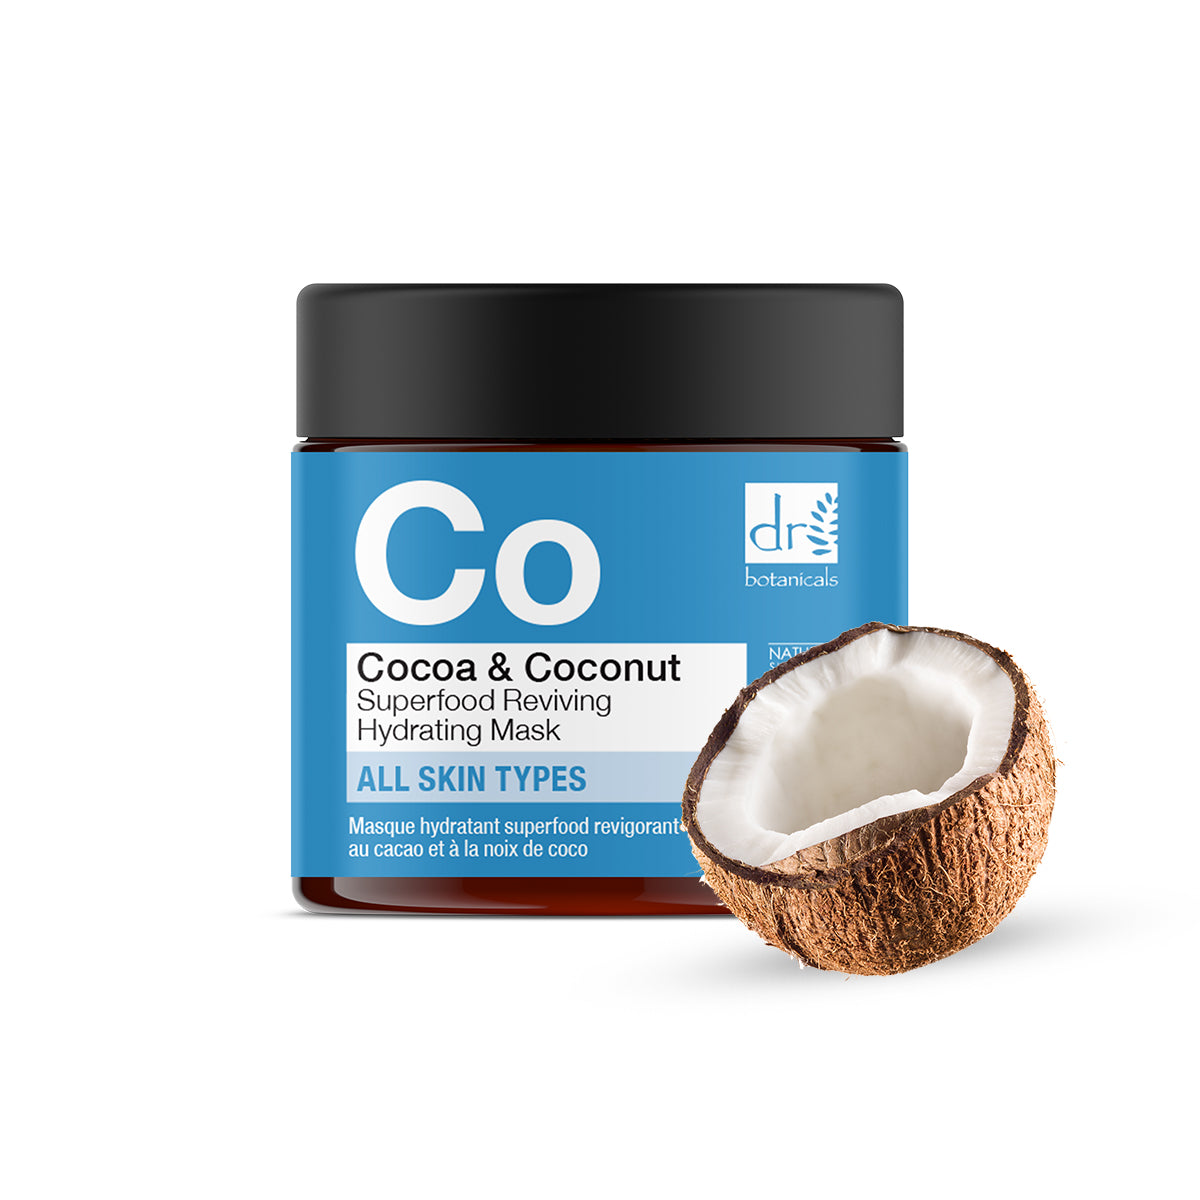 Cocoa & Coconut Superfood Reviving Hydrating Mask 60ml.